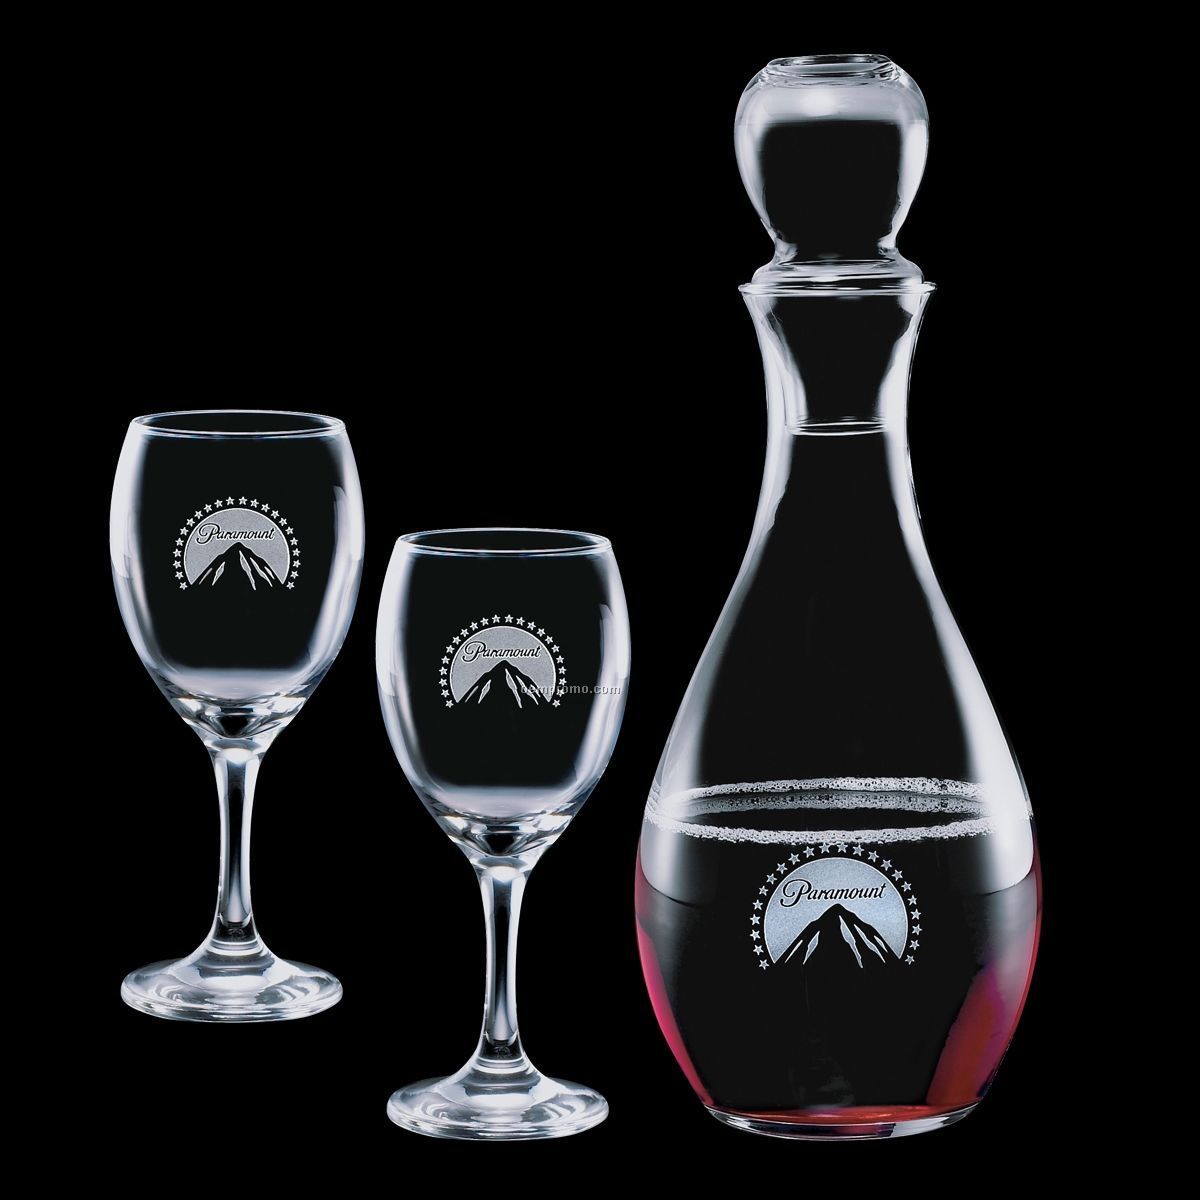 Carberry Decanter And 2 Wine Glasses